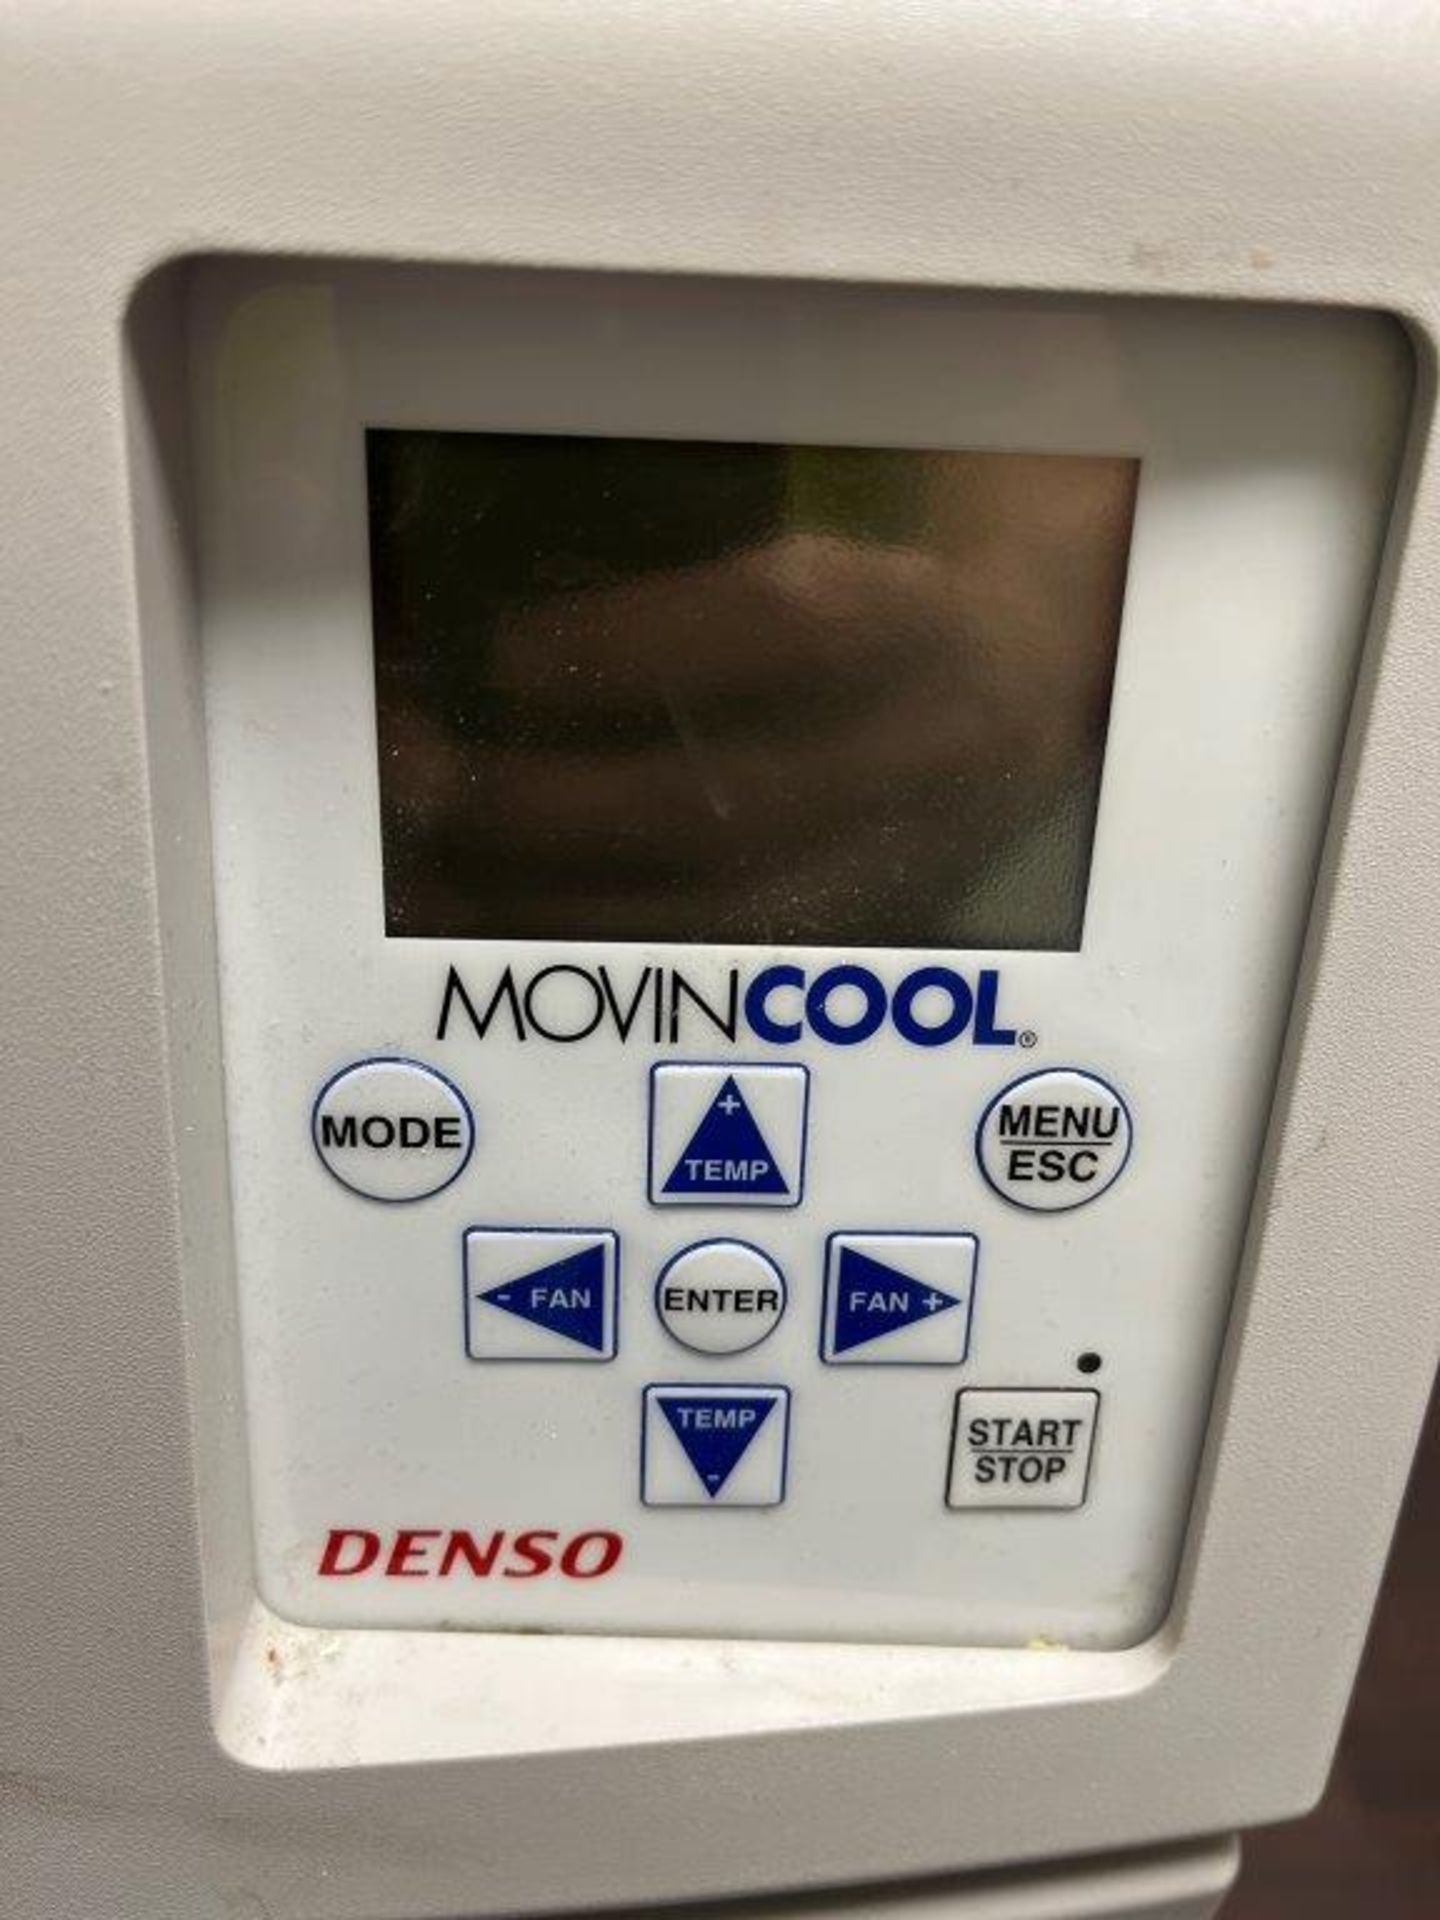 Denso Movincool Climate Pro 18 Mobile Cool/Heat Unit - Image 2 of 3